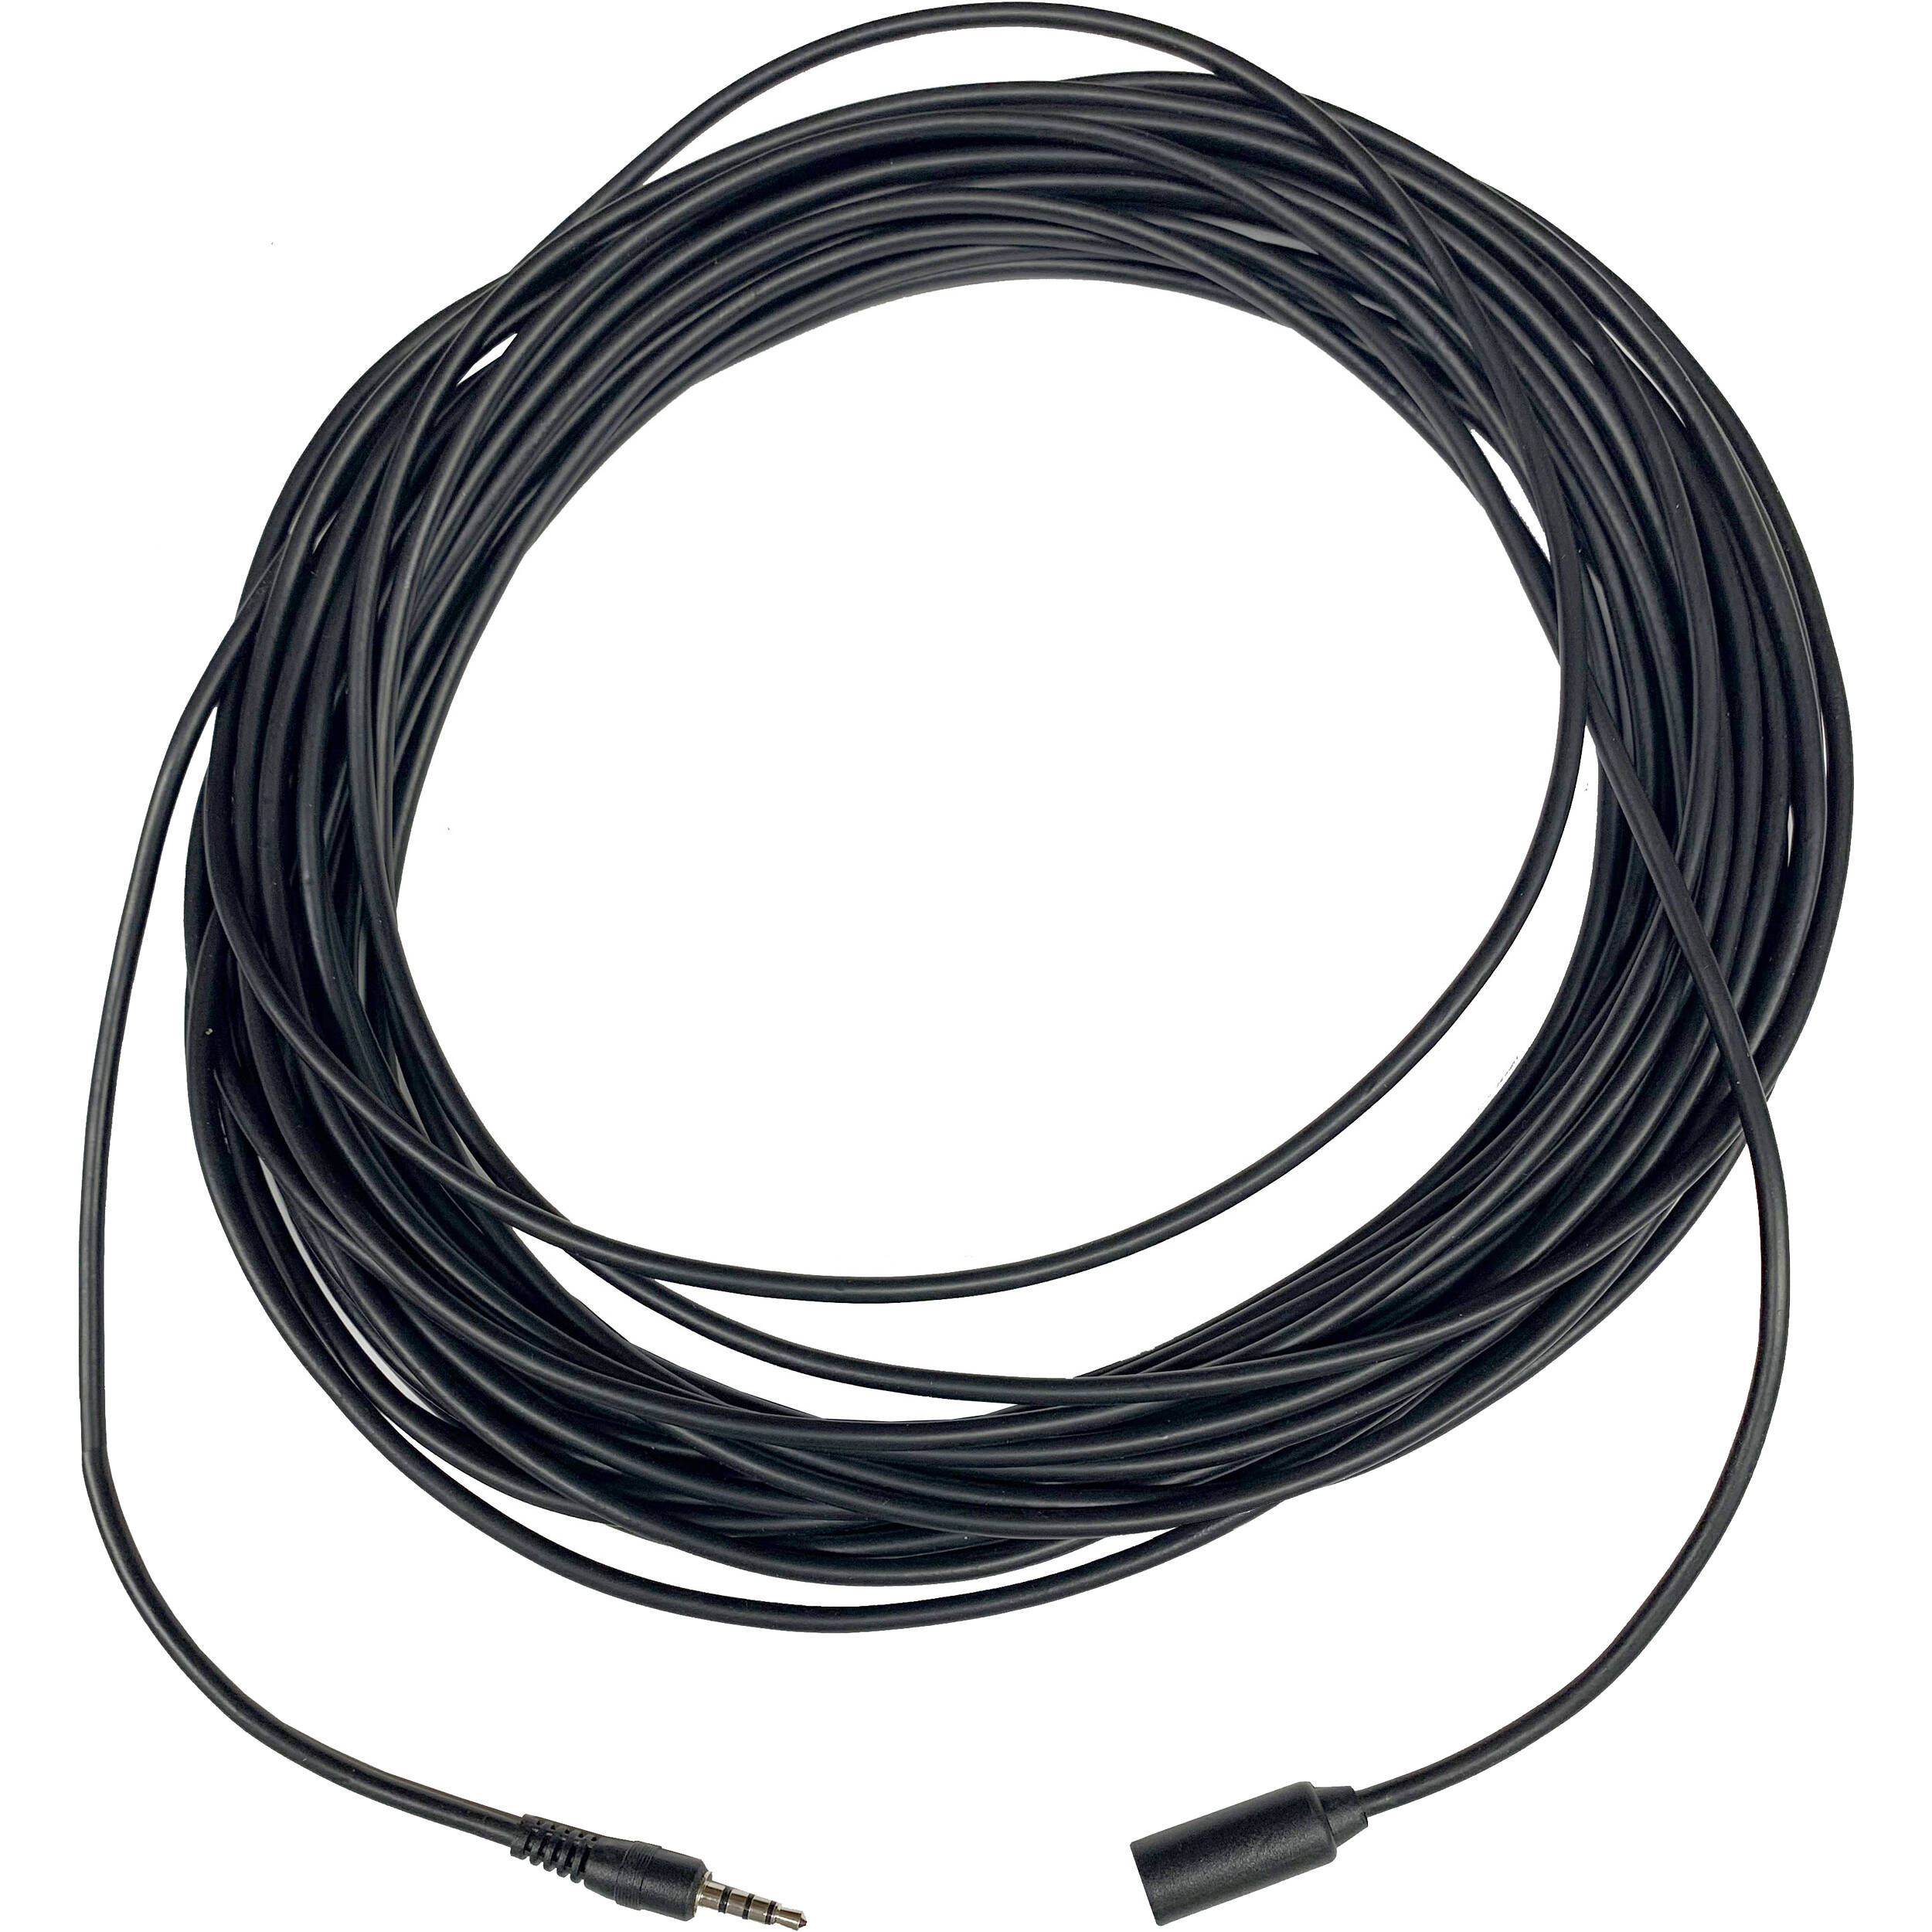 Eartec 30m Extension Cable for Hub with 3.5mm Male TRRS to Female TRRS